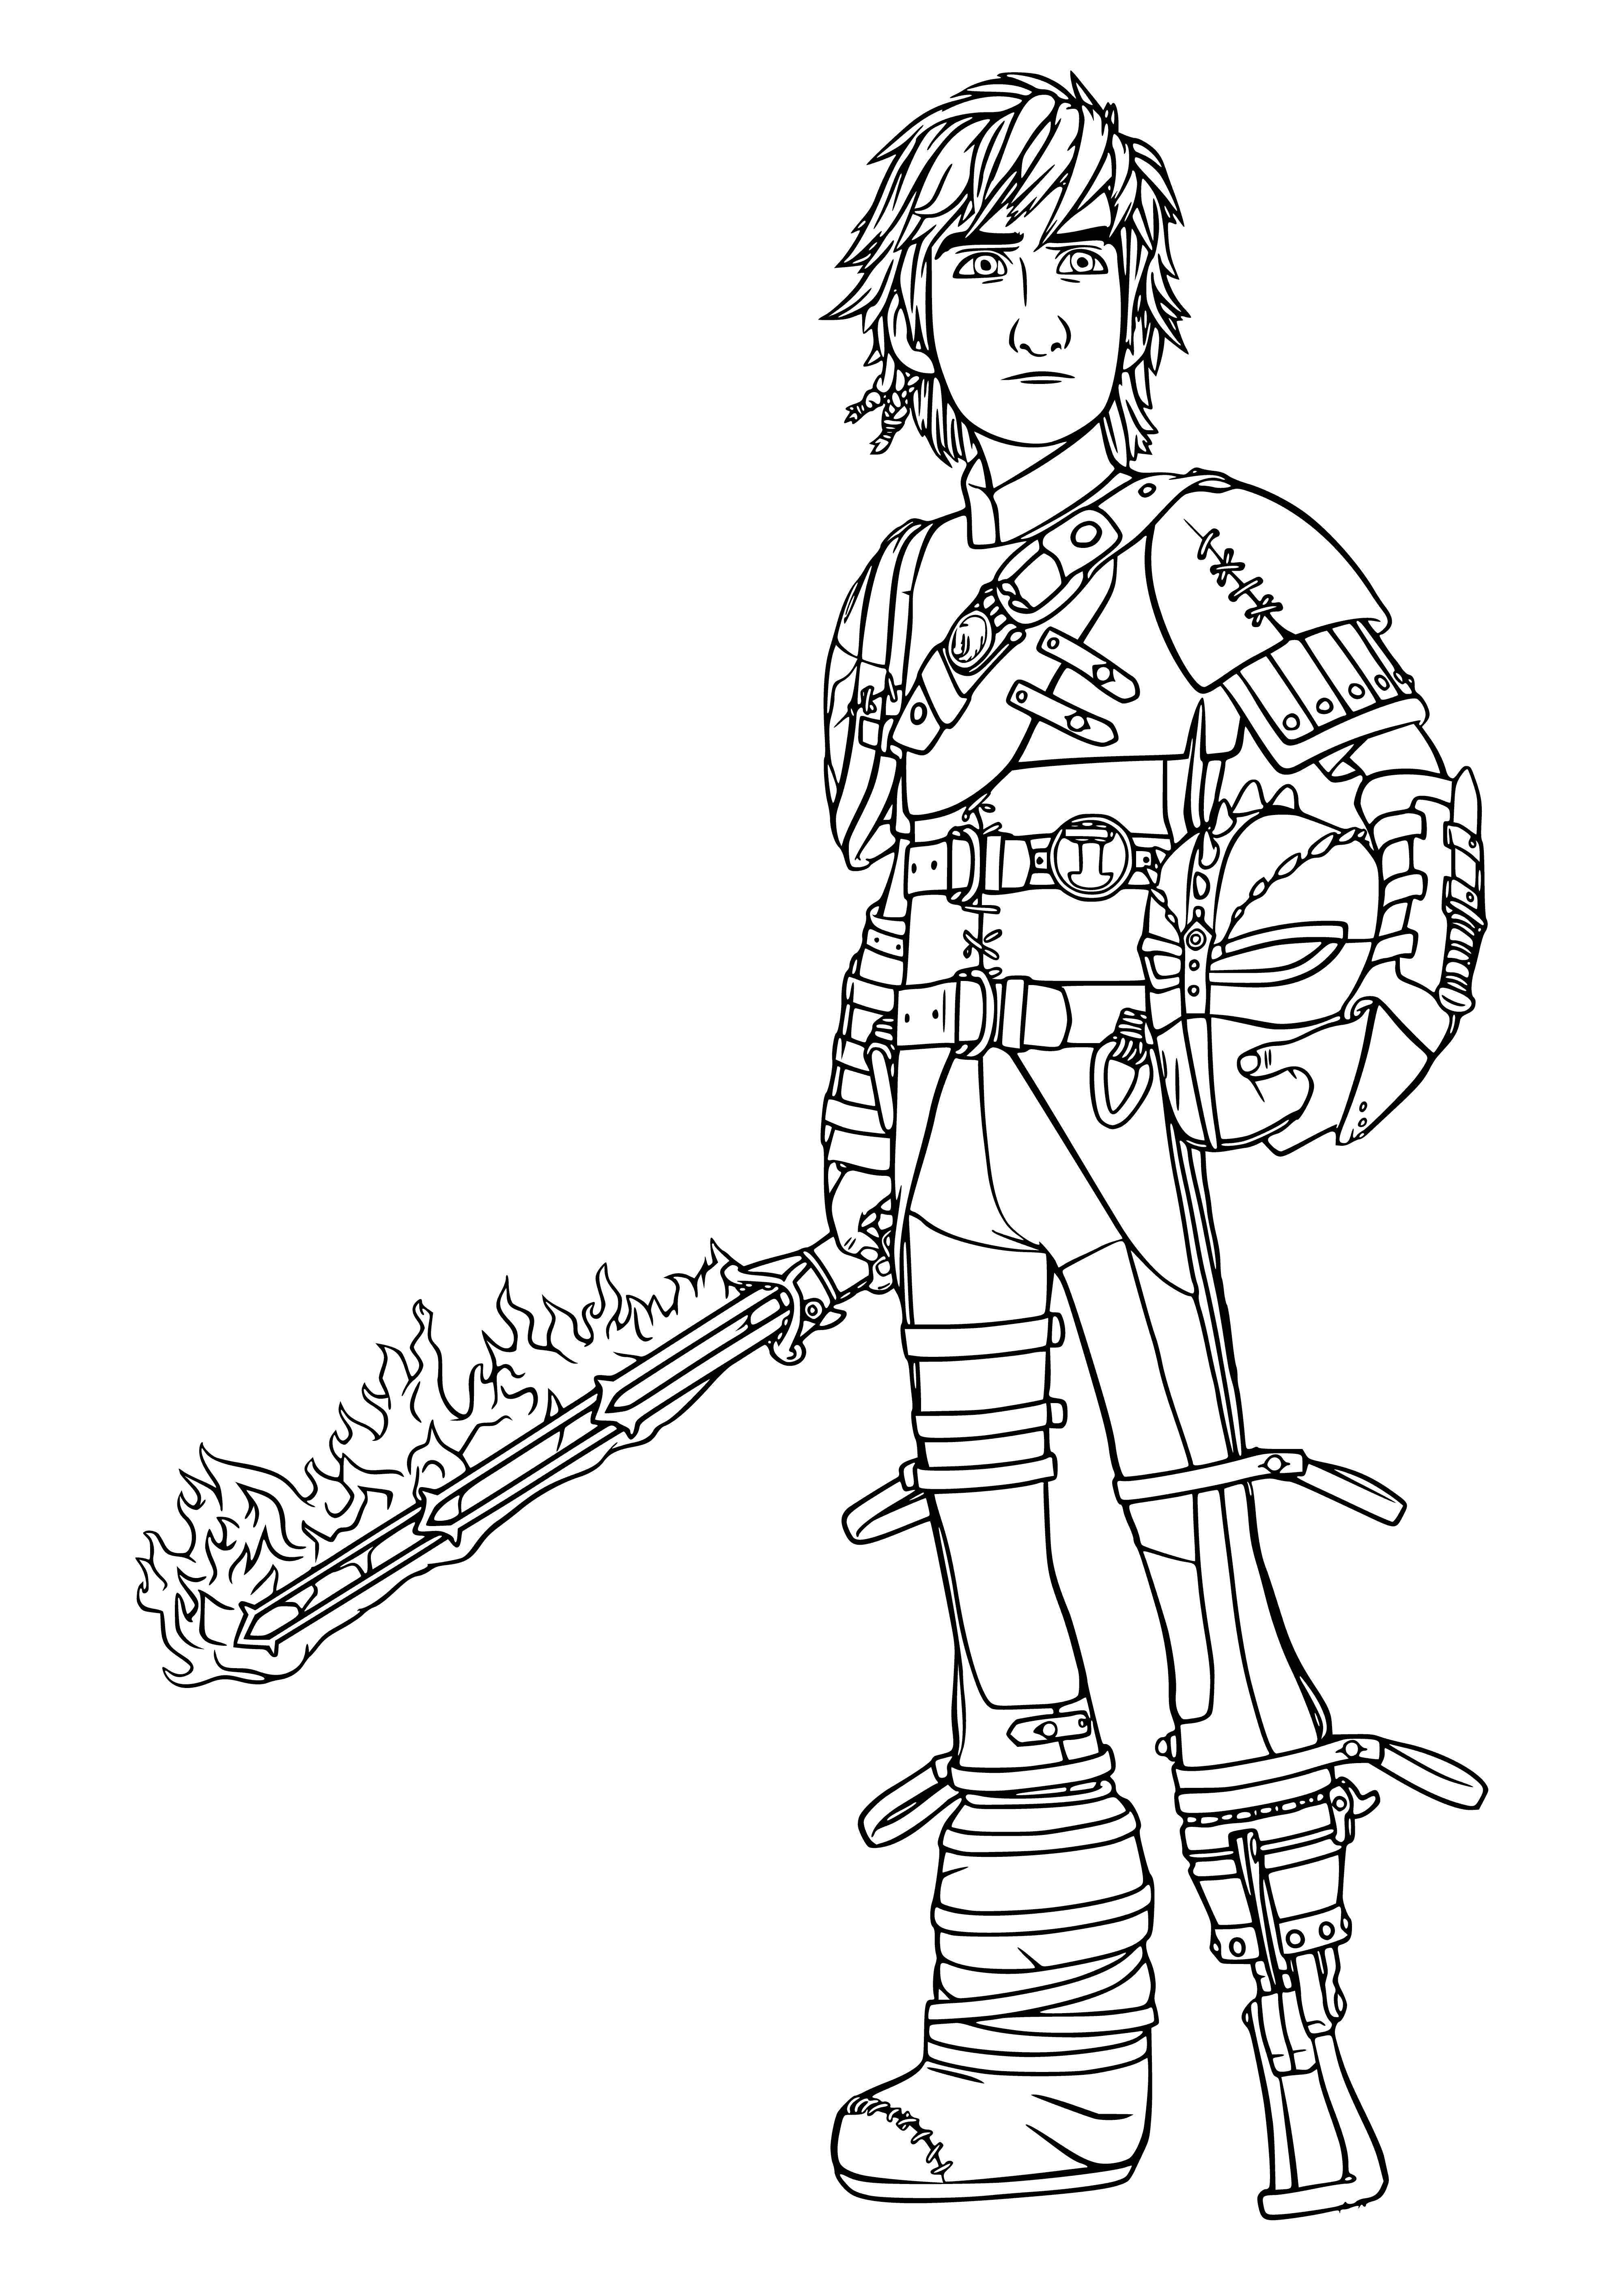 Hiccup coloring page